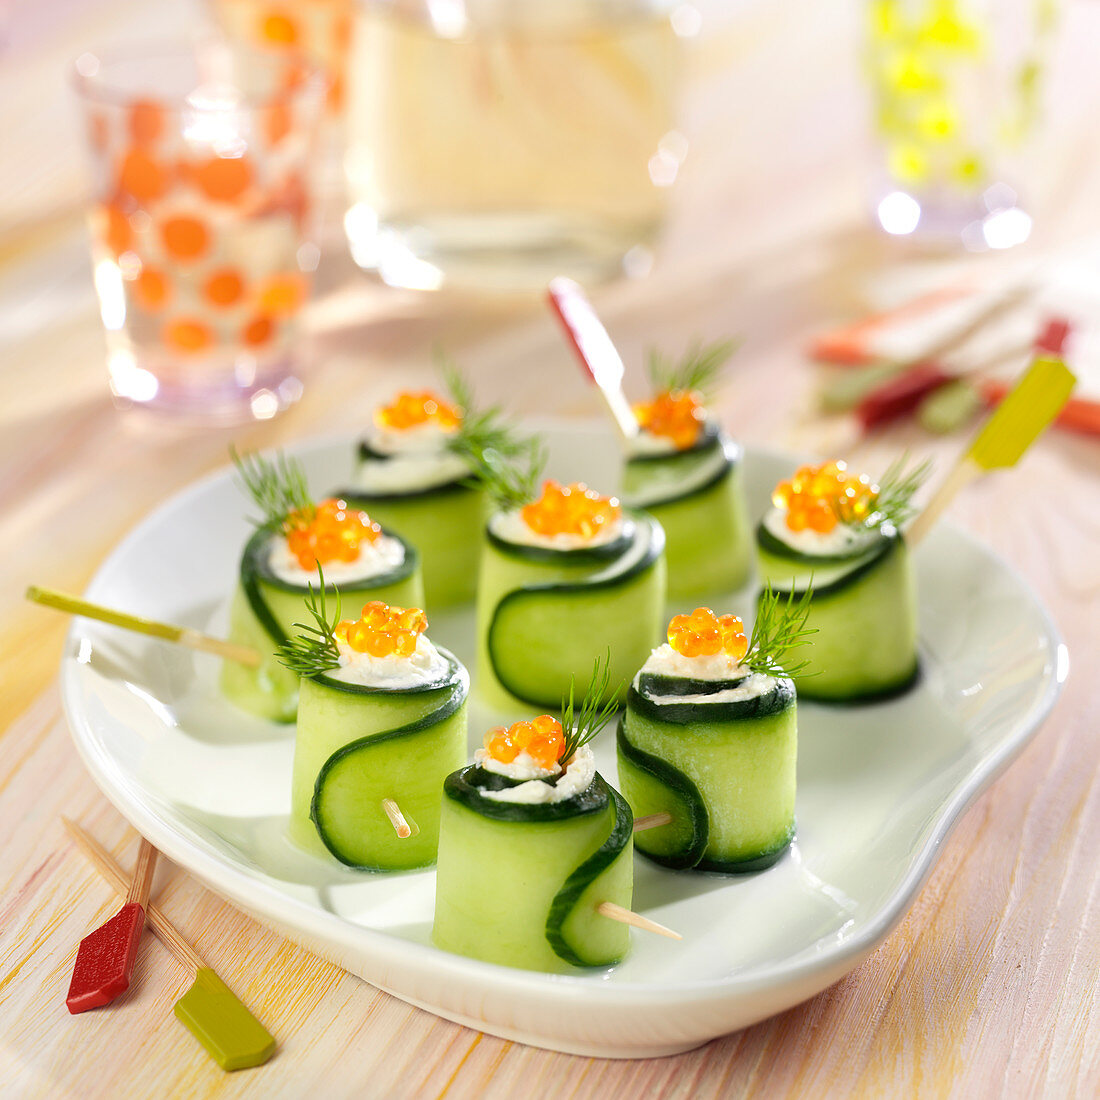 Cucumber rolls garnished with cream cheese and salmon roe